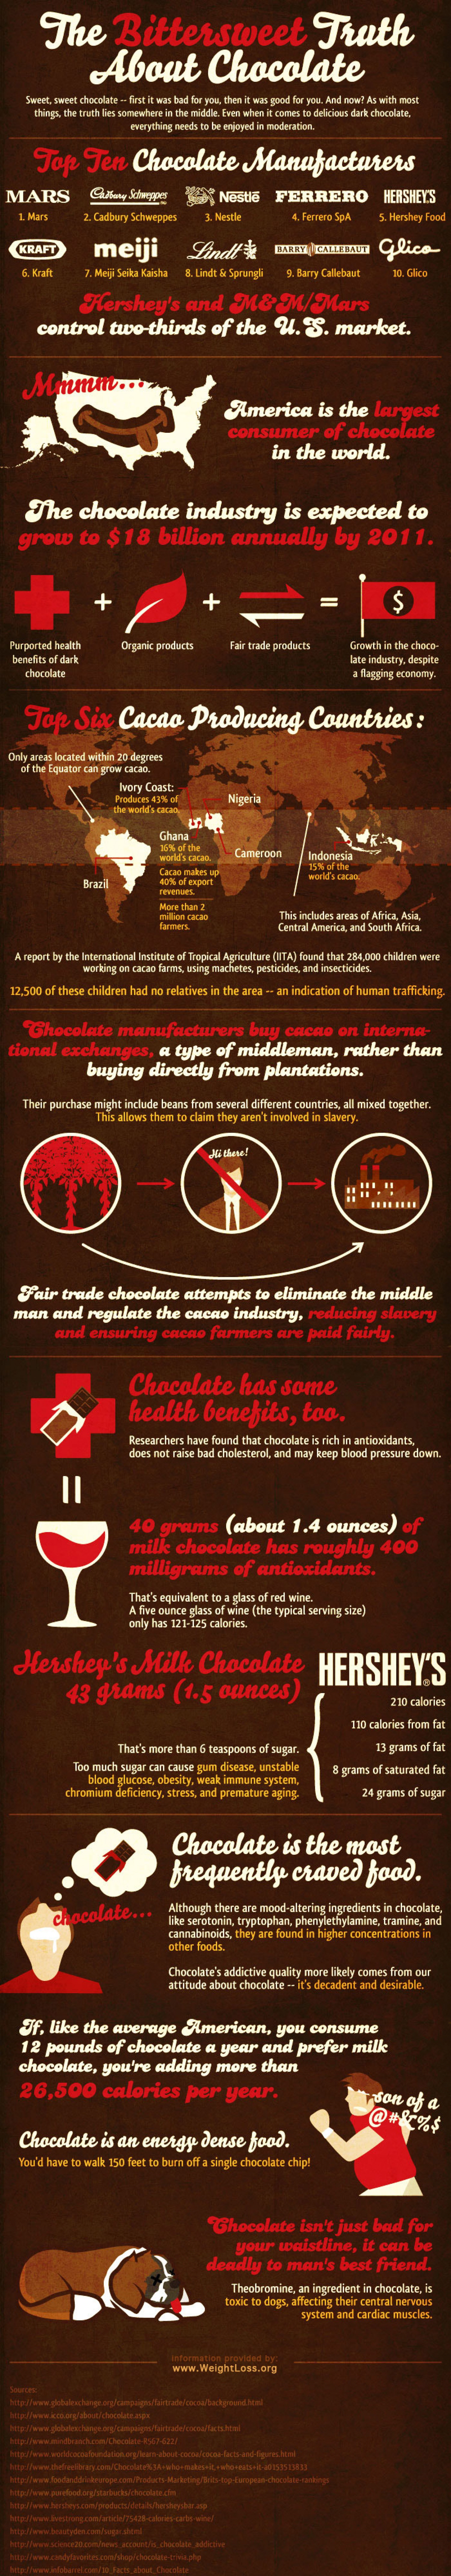 15 Facts about Chocolate Infographic